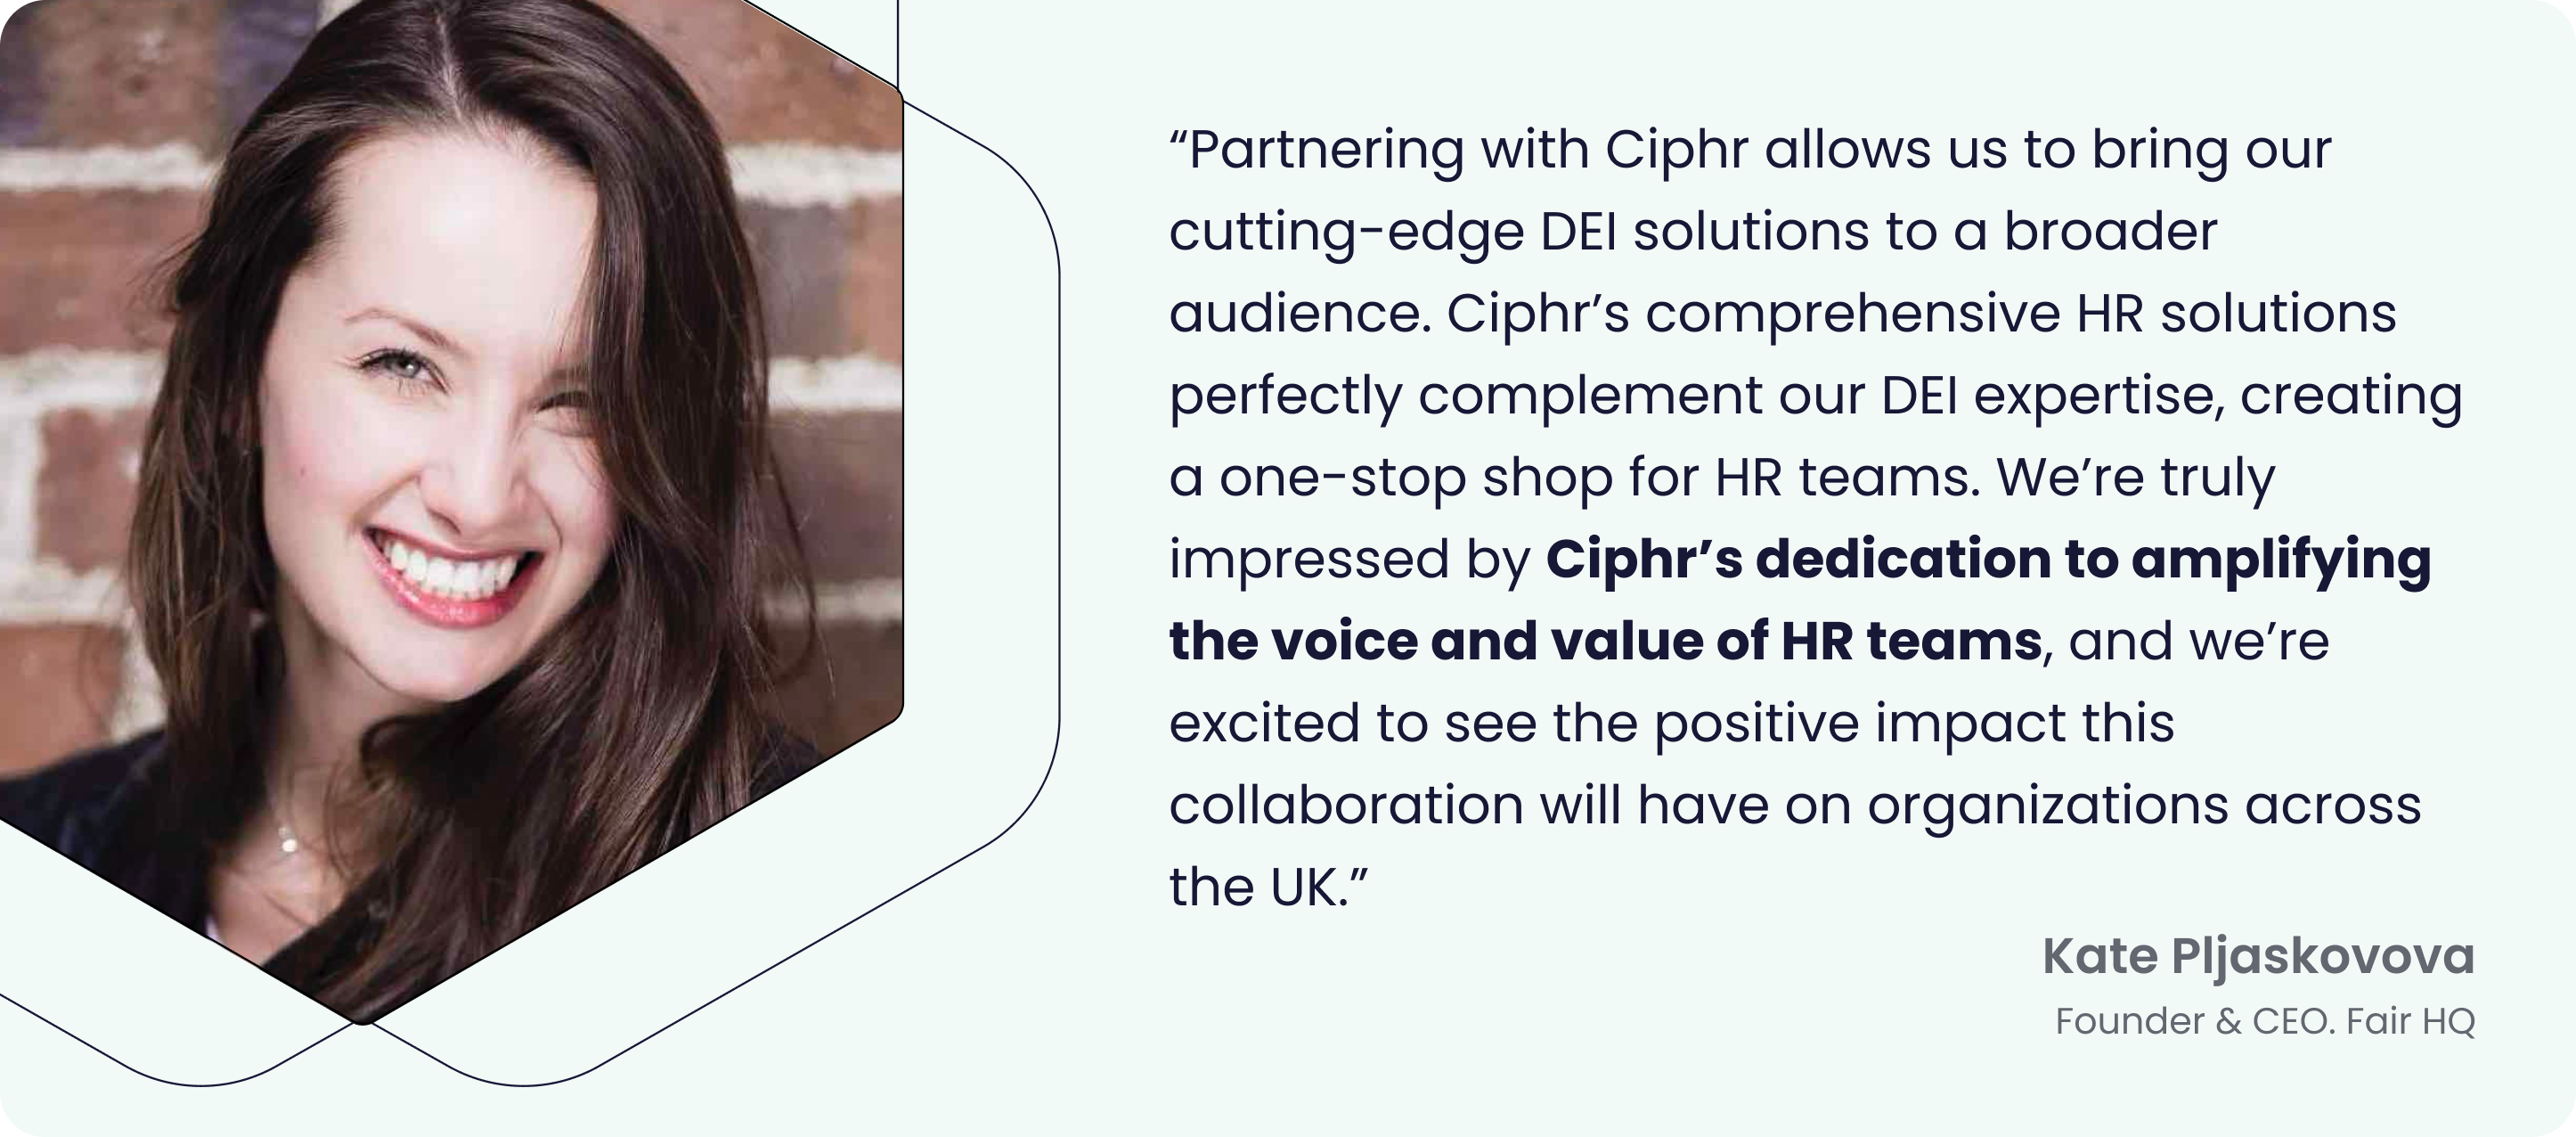 Image of Kate Pljaskovova, Founder & CEO of Fair HQ, with a quote: ‘Partnering with Ciphr allows us to bring our cutting-edge DEI solutions to a broader audience. Ciphr’s comprehensive HR solutions perfectly complement our DEI expertise, creating a one-stop shop for HR teams. We’re truly impressed by Ciphr’s dedication to amplifying the voice and value of HR teams, and we’re excited to see the positive impact this collaboration will have on organizations across the UK.